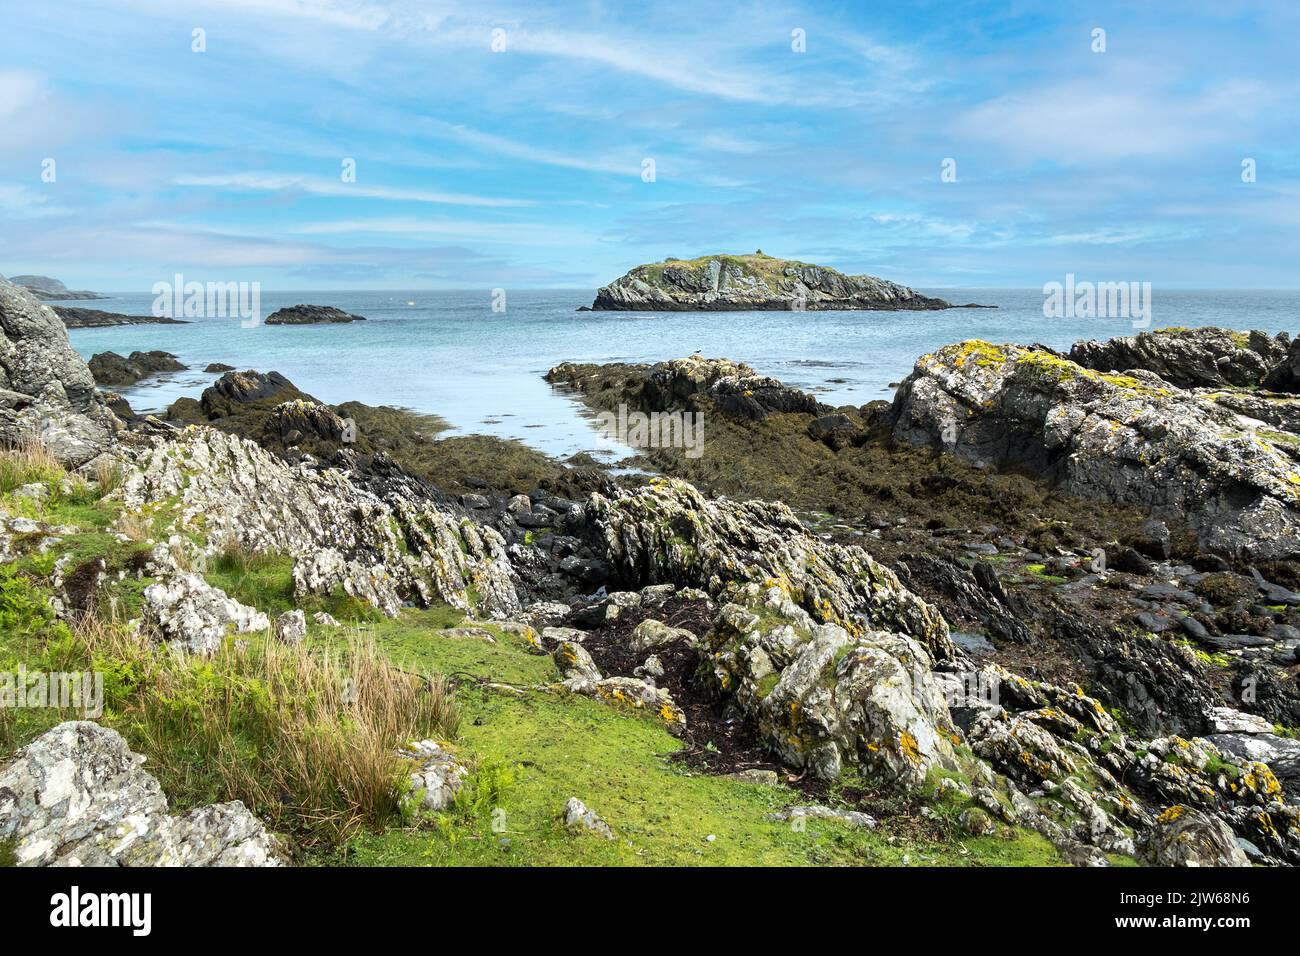 The tiny island of Eilean Olmsa lies just offshore at Port Olmsa on the remote Hebridean Island of Colonsay, Scotland, UK Stock Photo